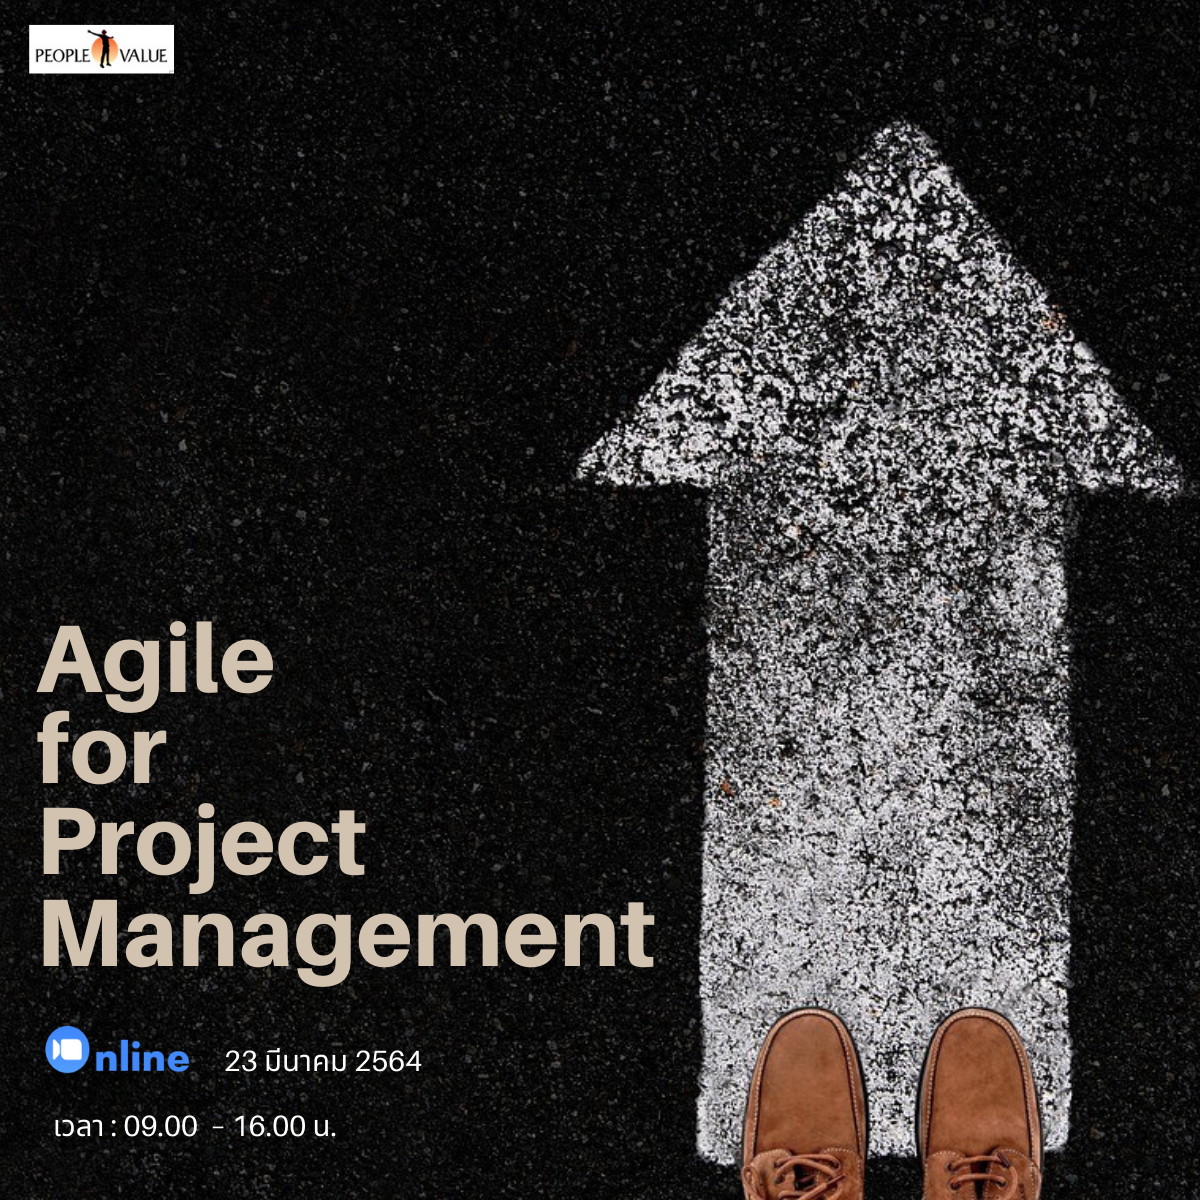 Agile for Project Management